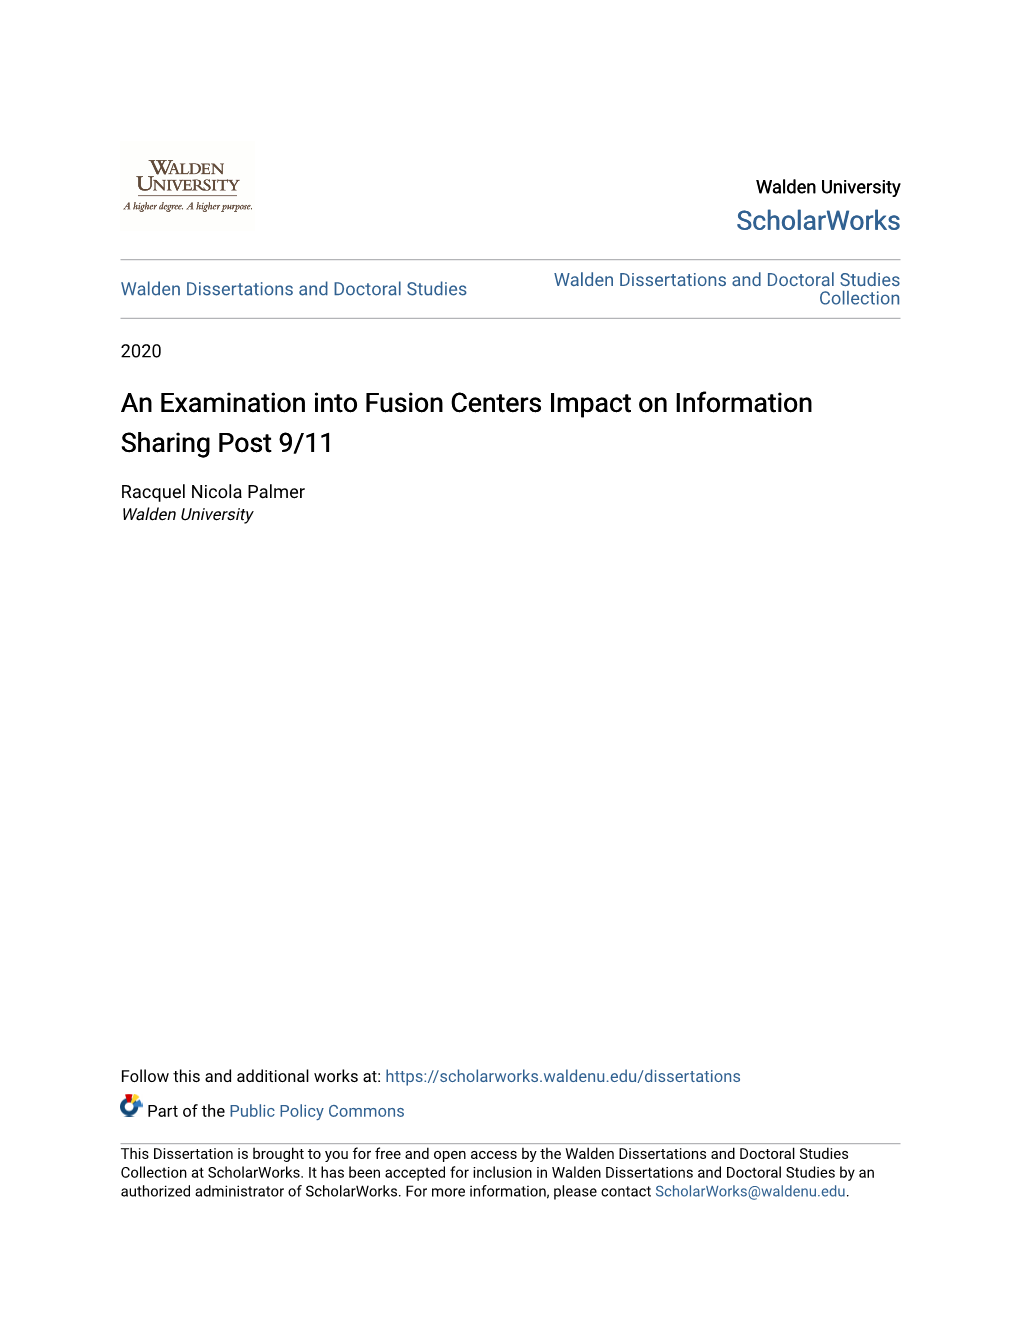 An Examination Into Fusion Centers Impact on Information Sharing Post 9/11